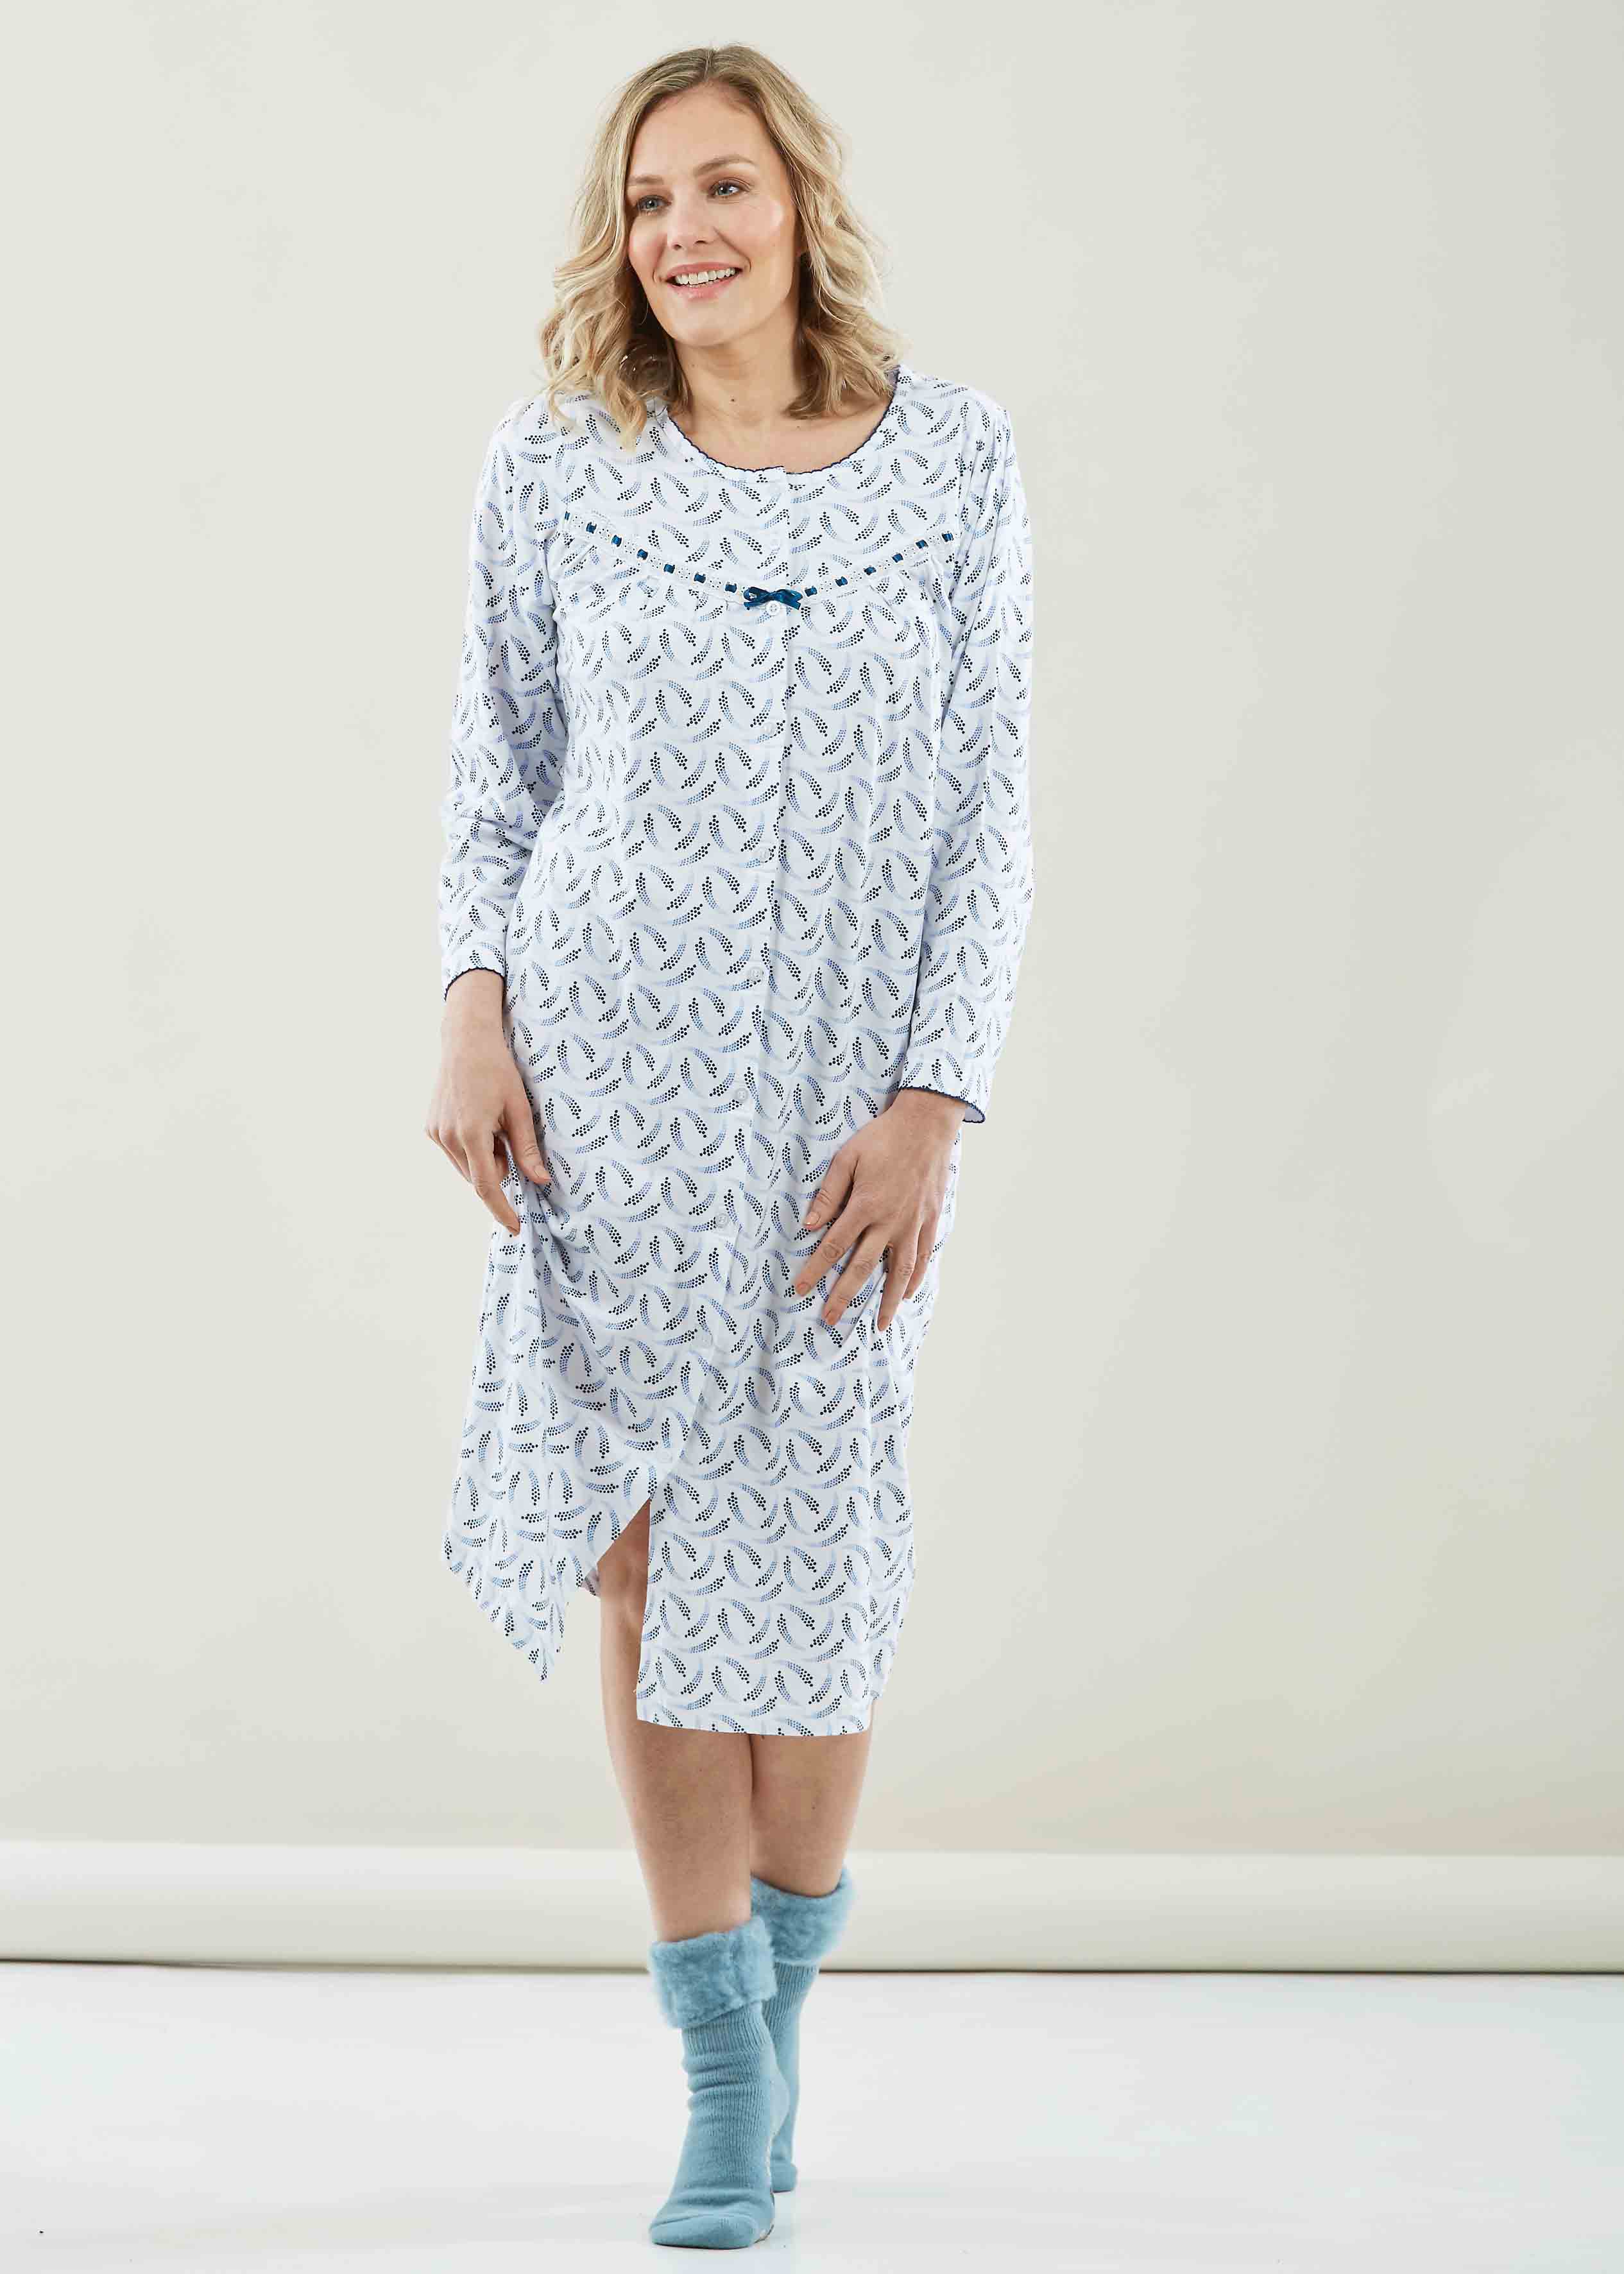 front opening cotton nightdress